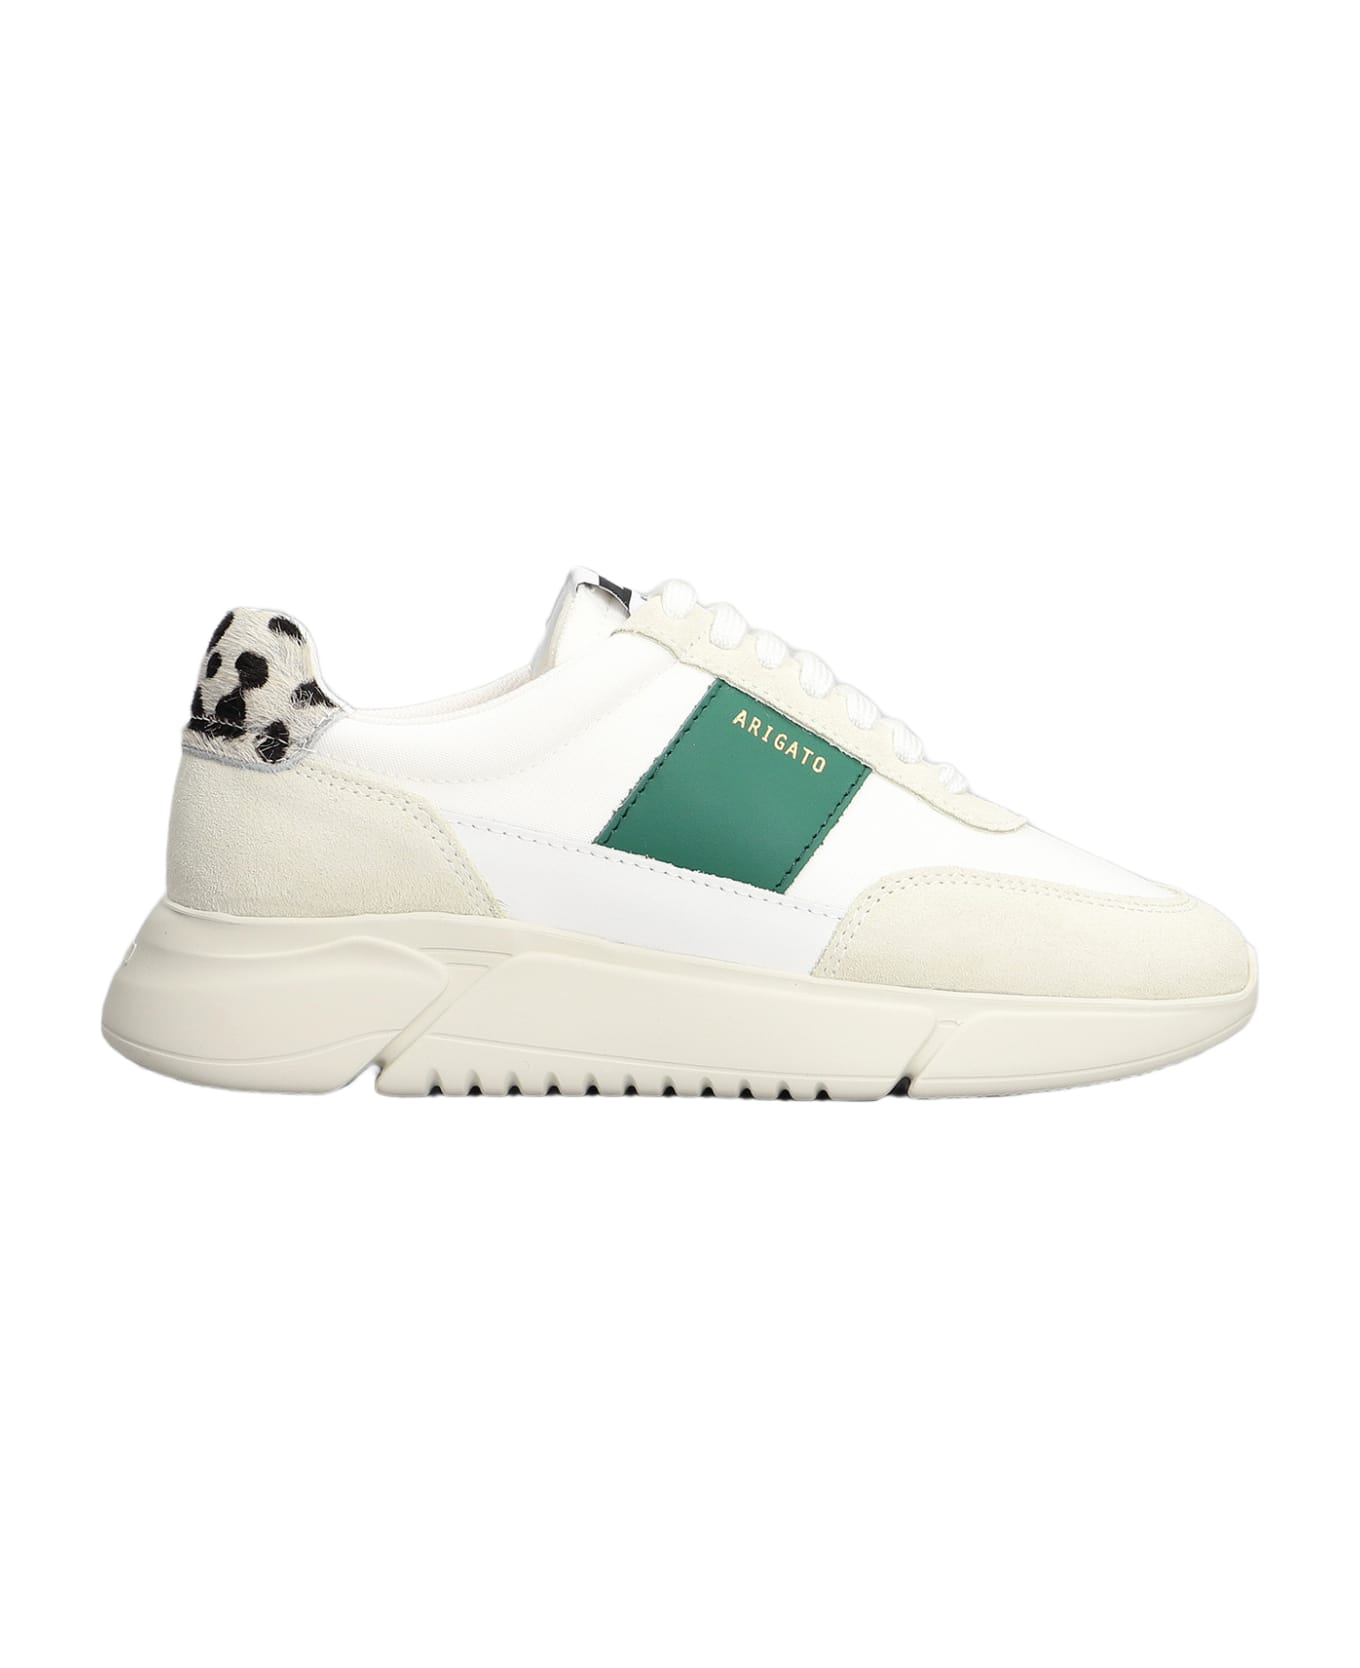 Axel Arigato Genesis Sneakers In White Leather - white スニーカー